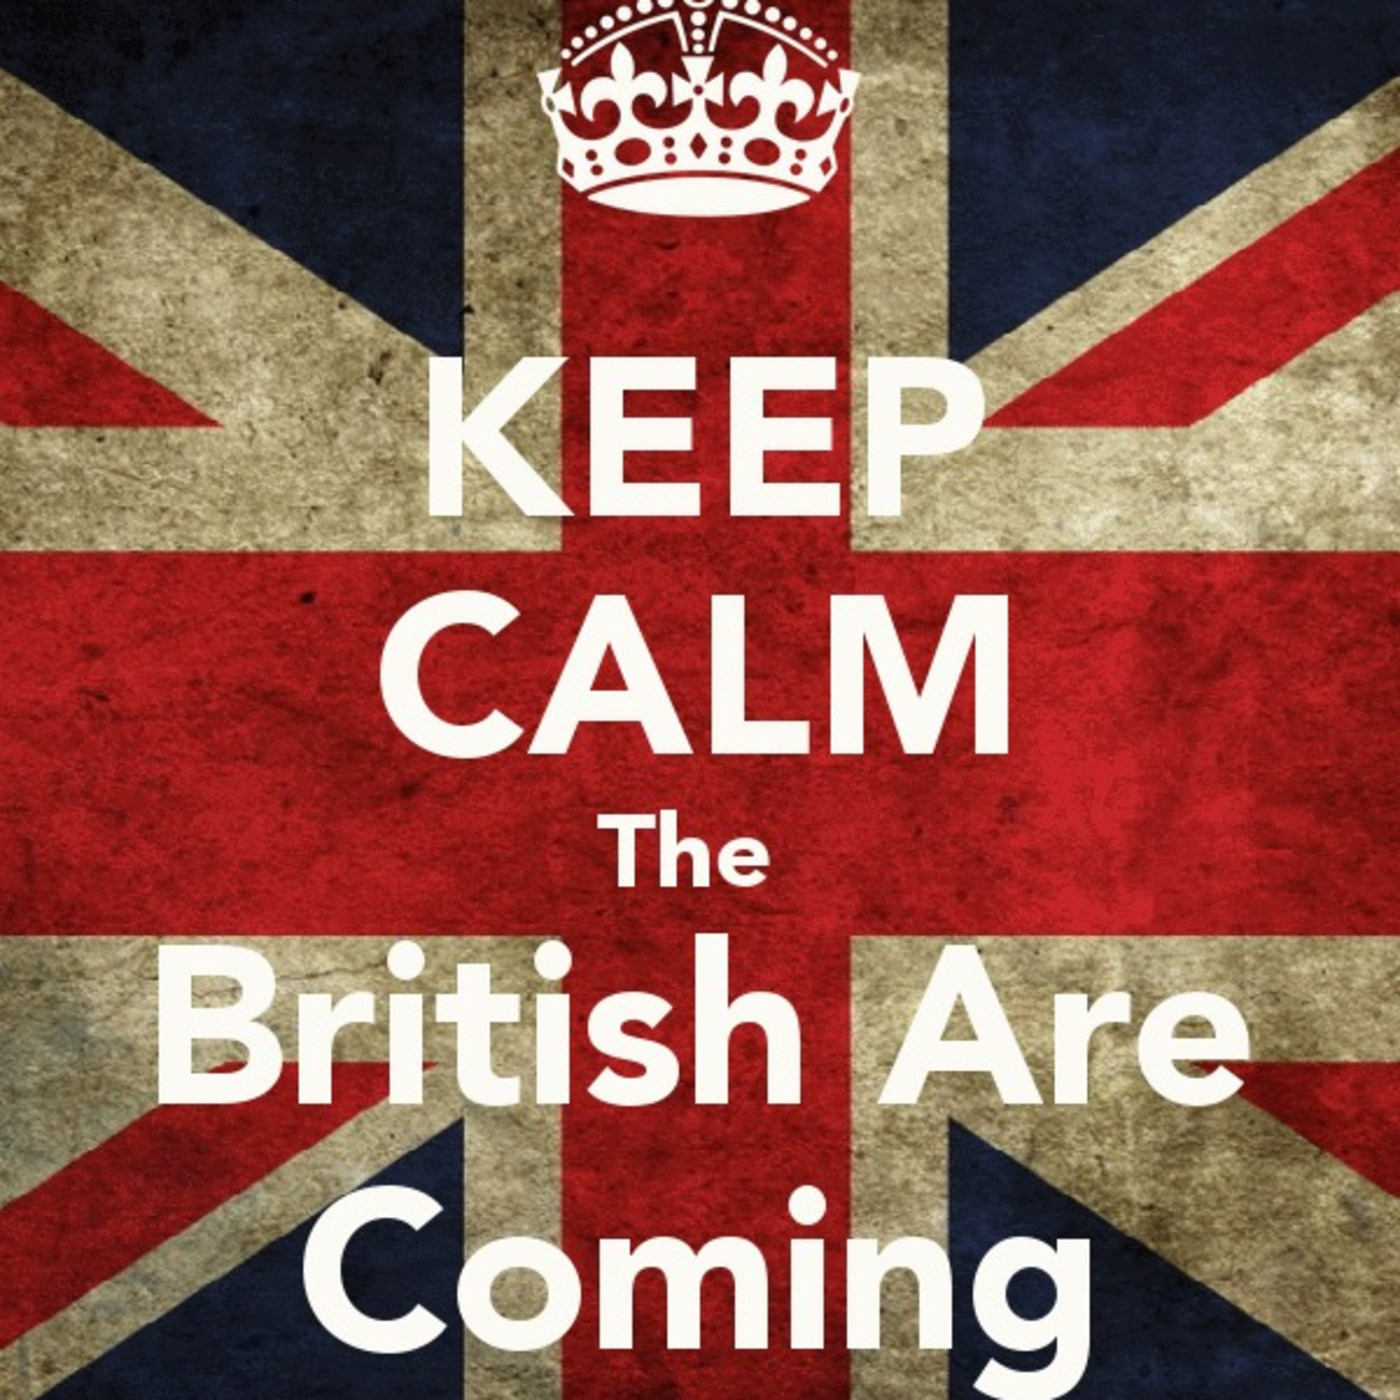 The British (Students) are Coming!